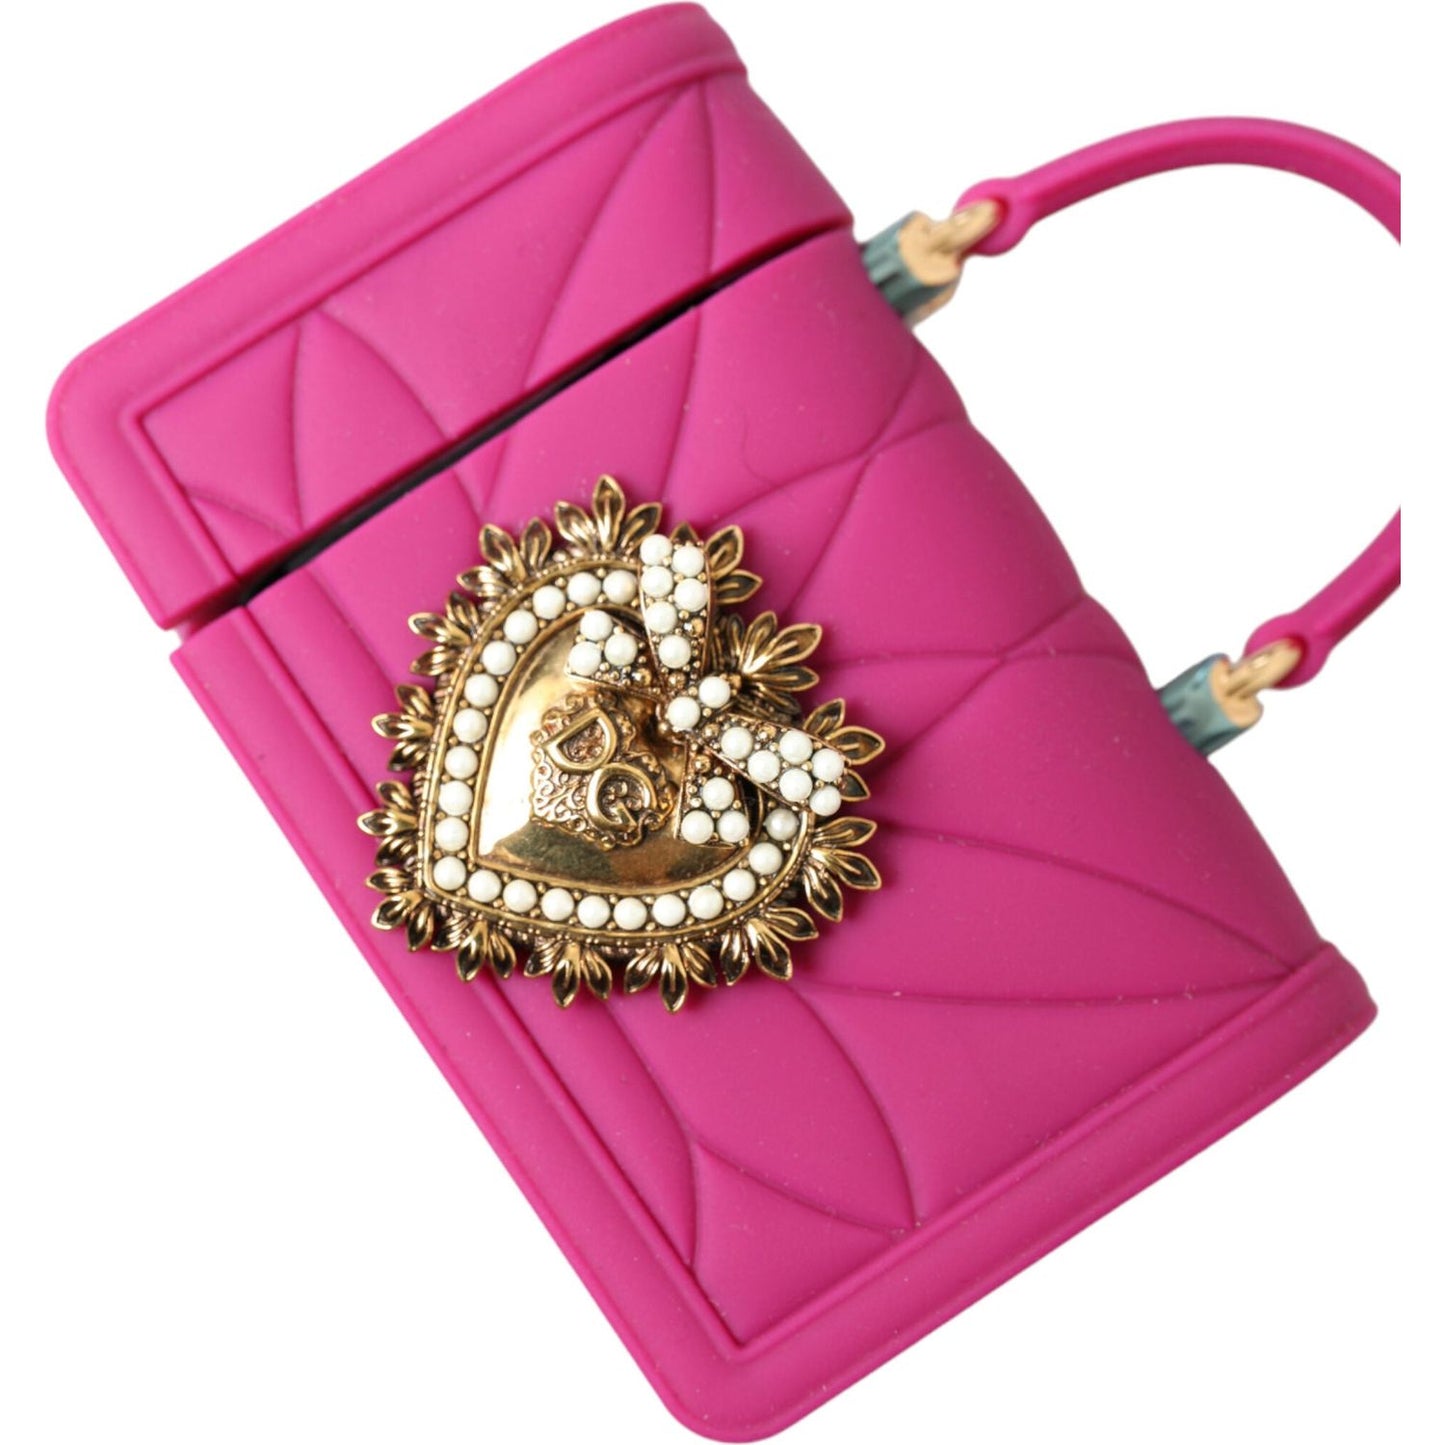 Dolce & Gabbana Chic Quilted Silicone Airpods Case - Pink & Gold pink-silicone-devotion-heart-bag-gold-chain-airpods-case 465A6731-BG-scaled-9692b8cf-e29.jpg